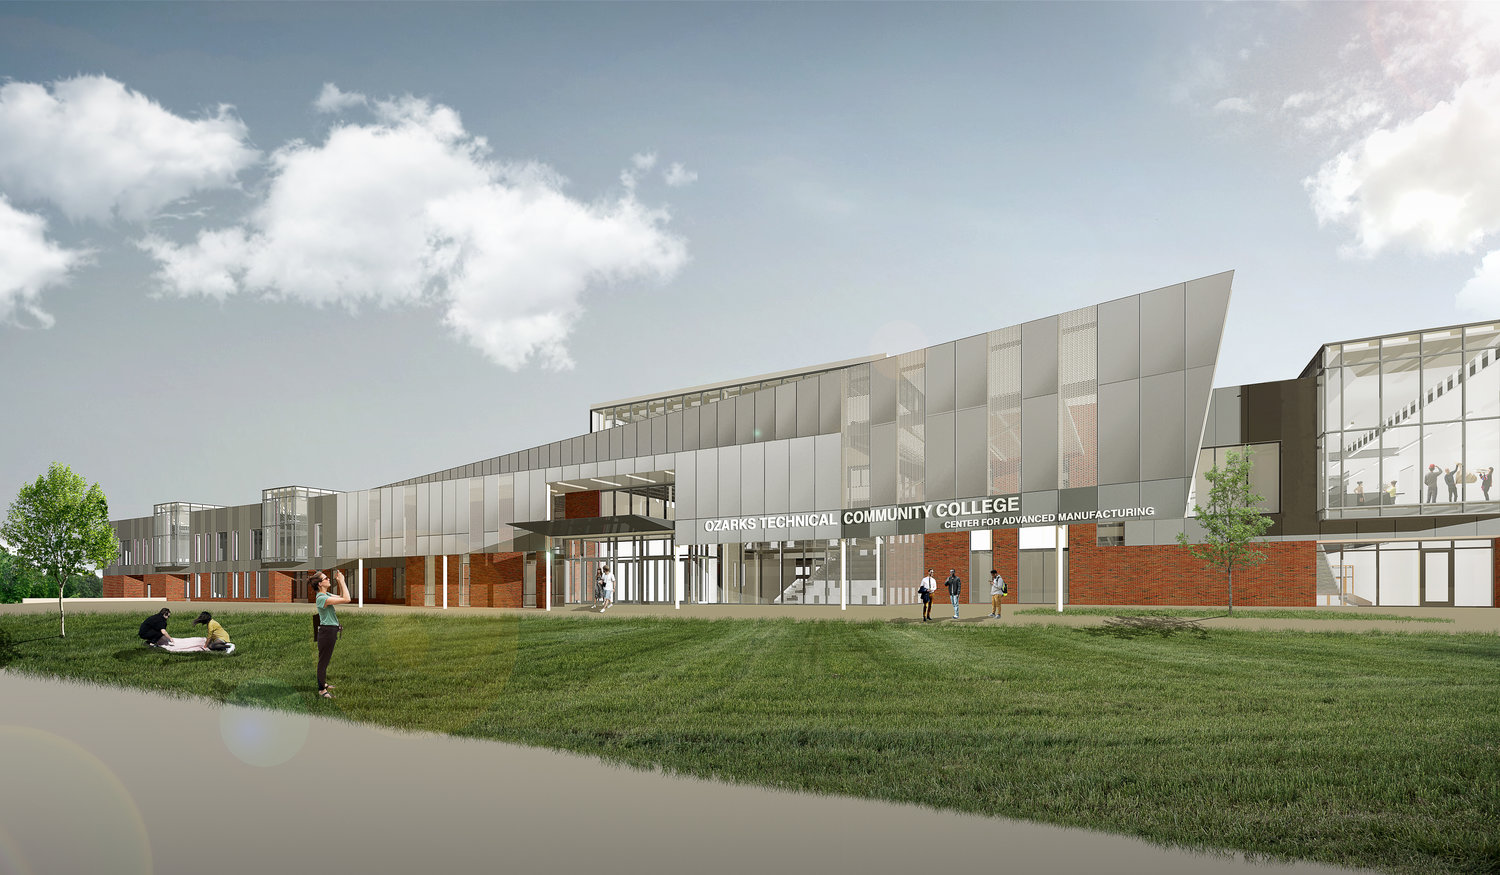 A Thursday groundbreaking ceremony is scheduled for Ozarks Technical Community College’s Center for Advanced Manufacturing.